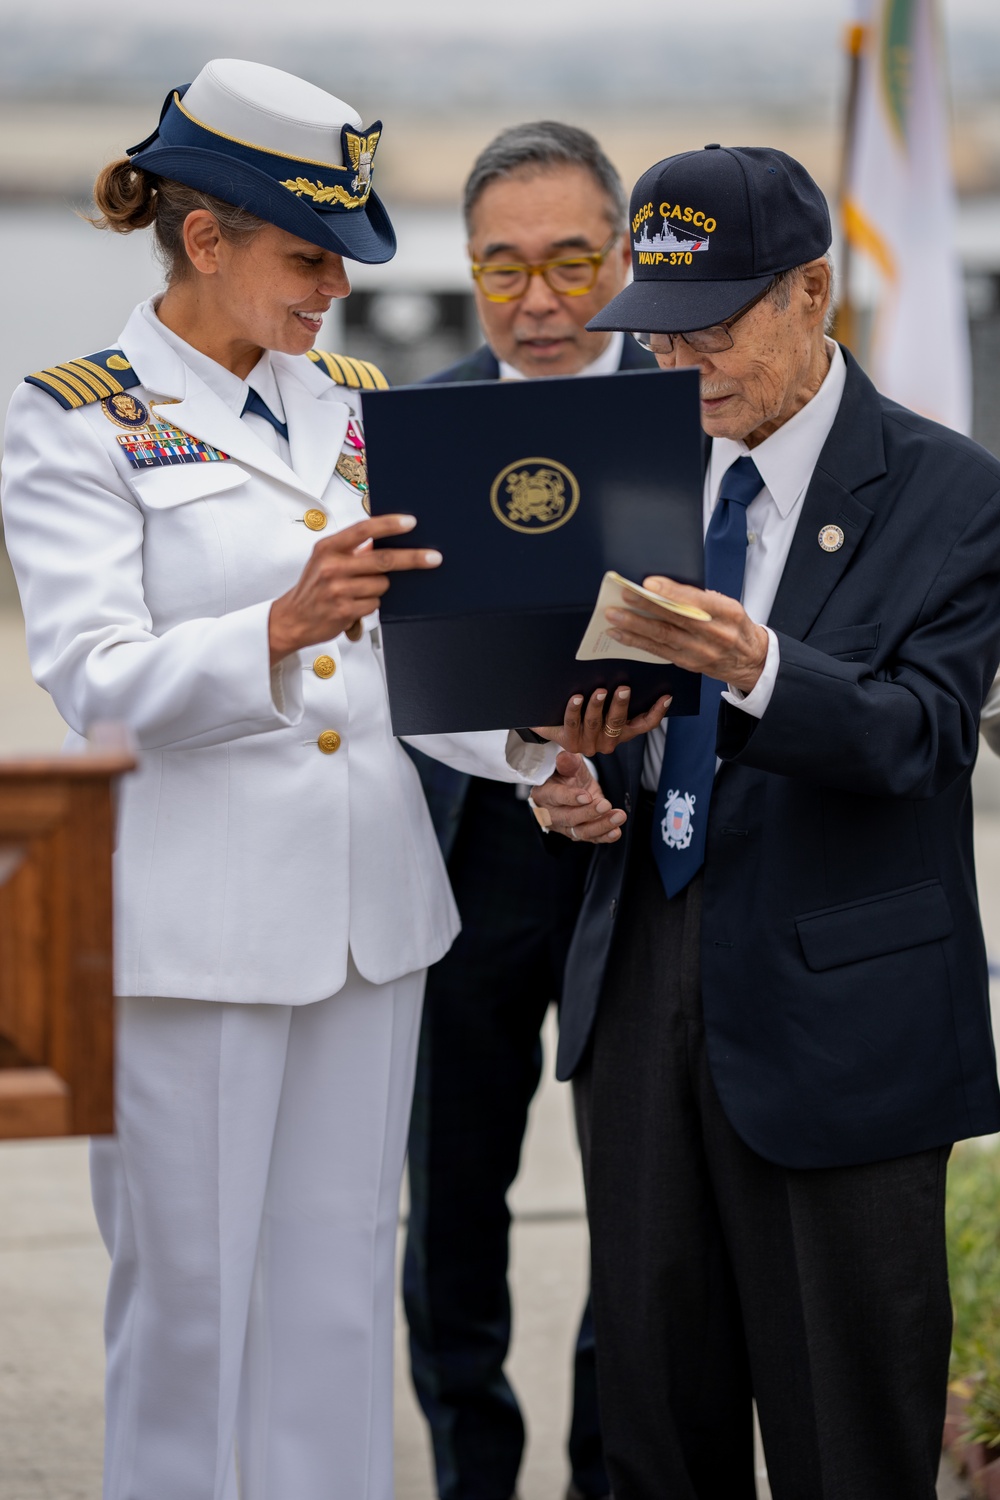 Coast Guard presents veteran with National Defense Service Medal for 1950s service